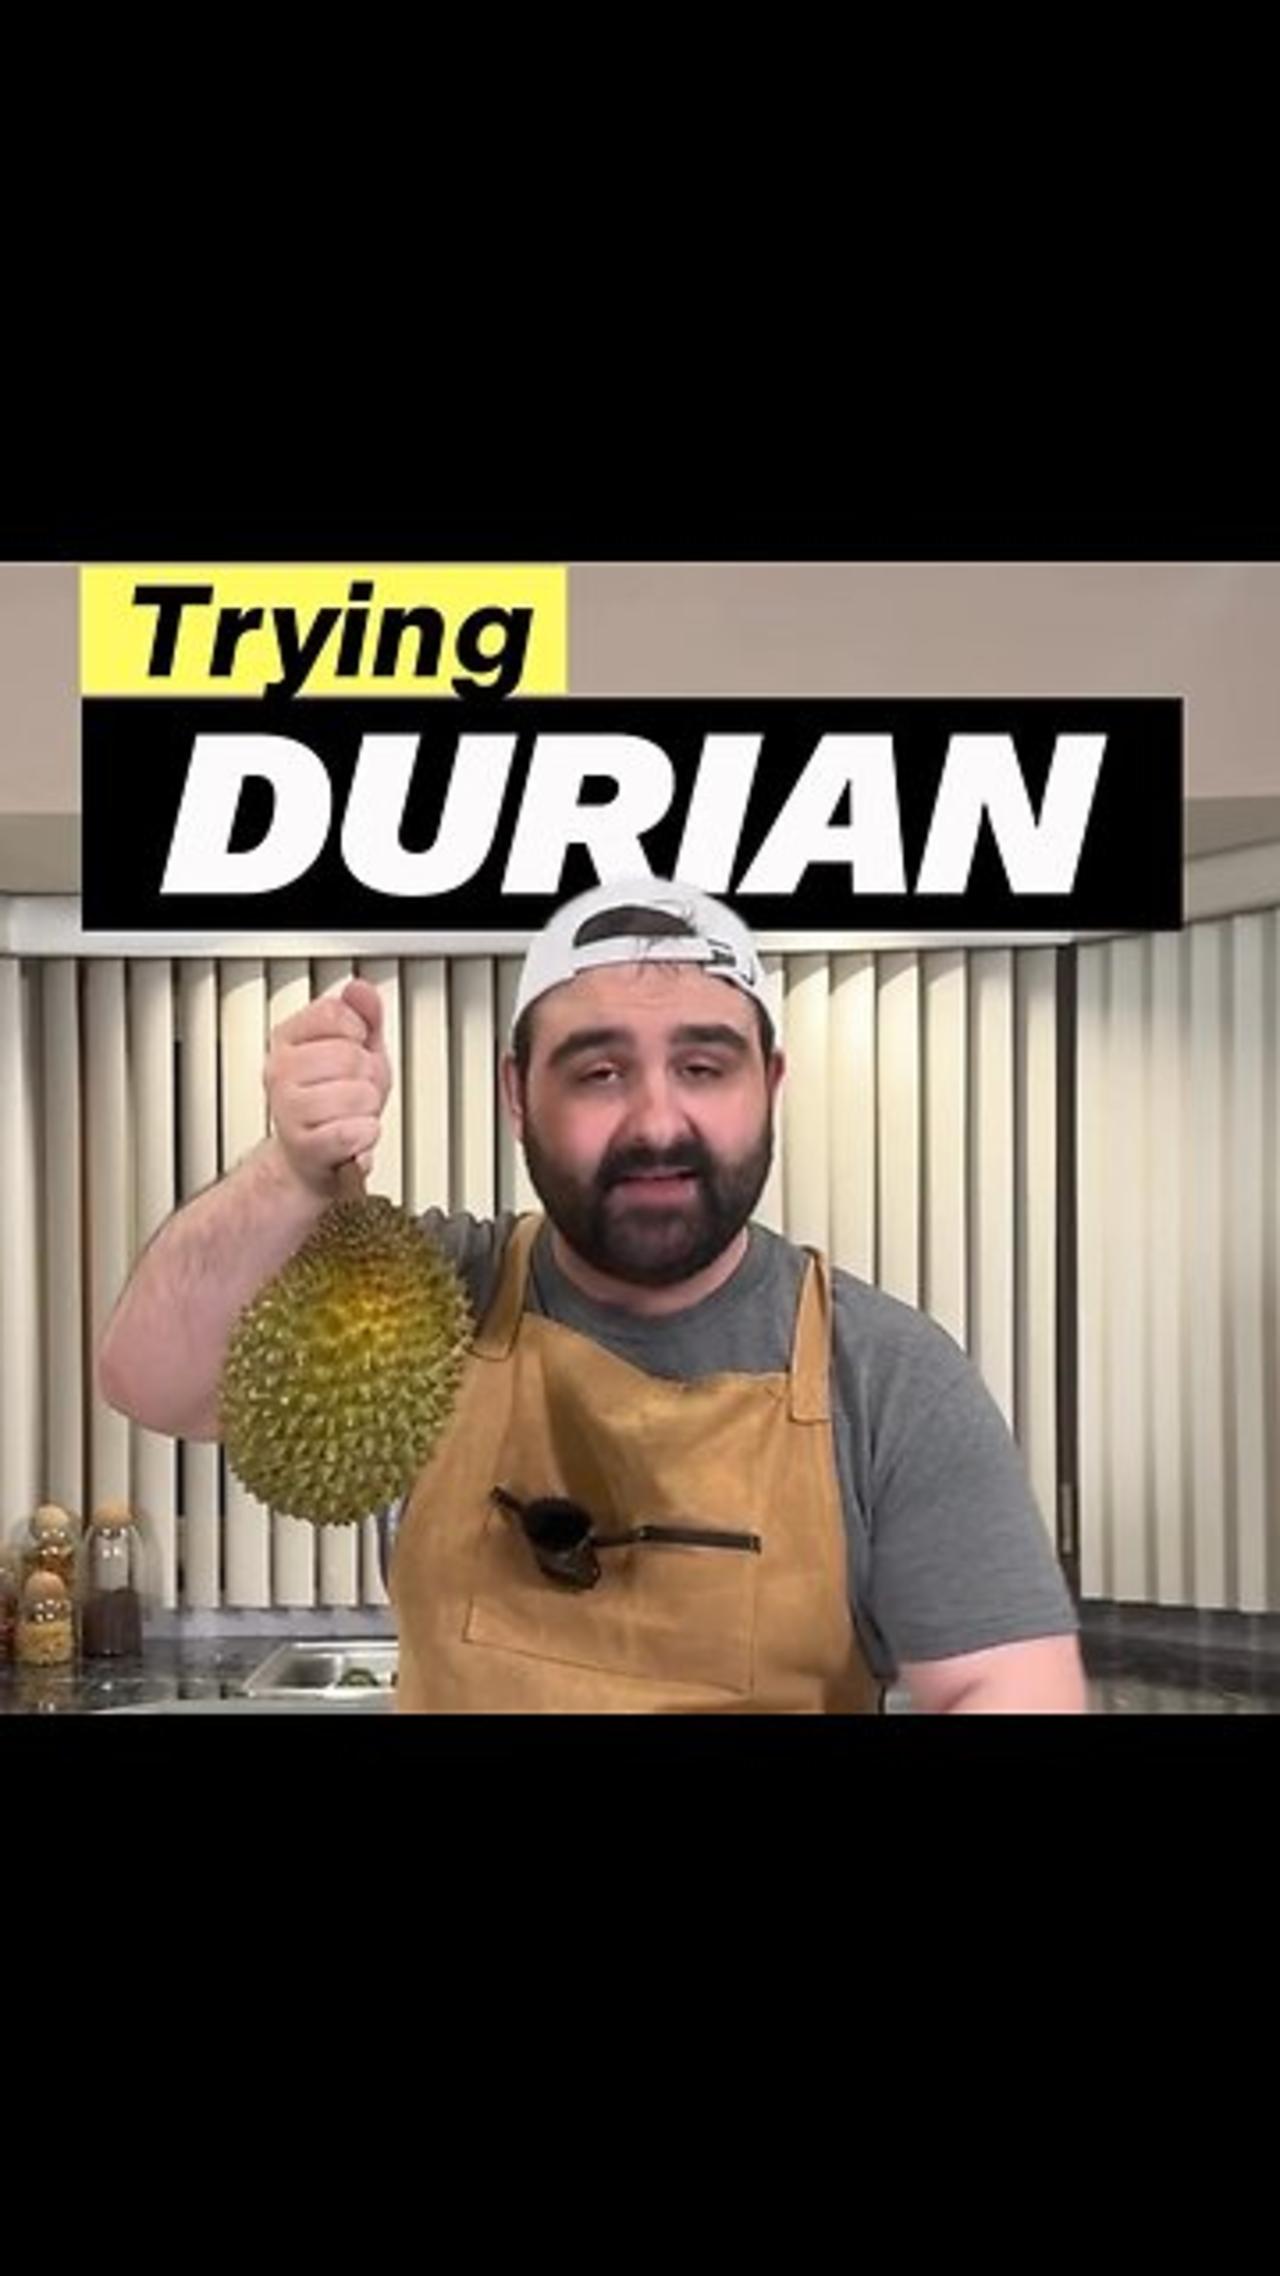 What does Durian Taste like?